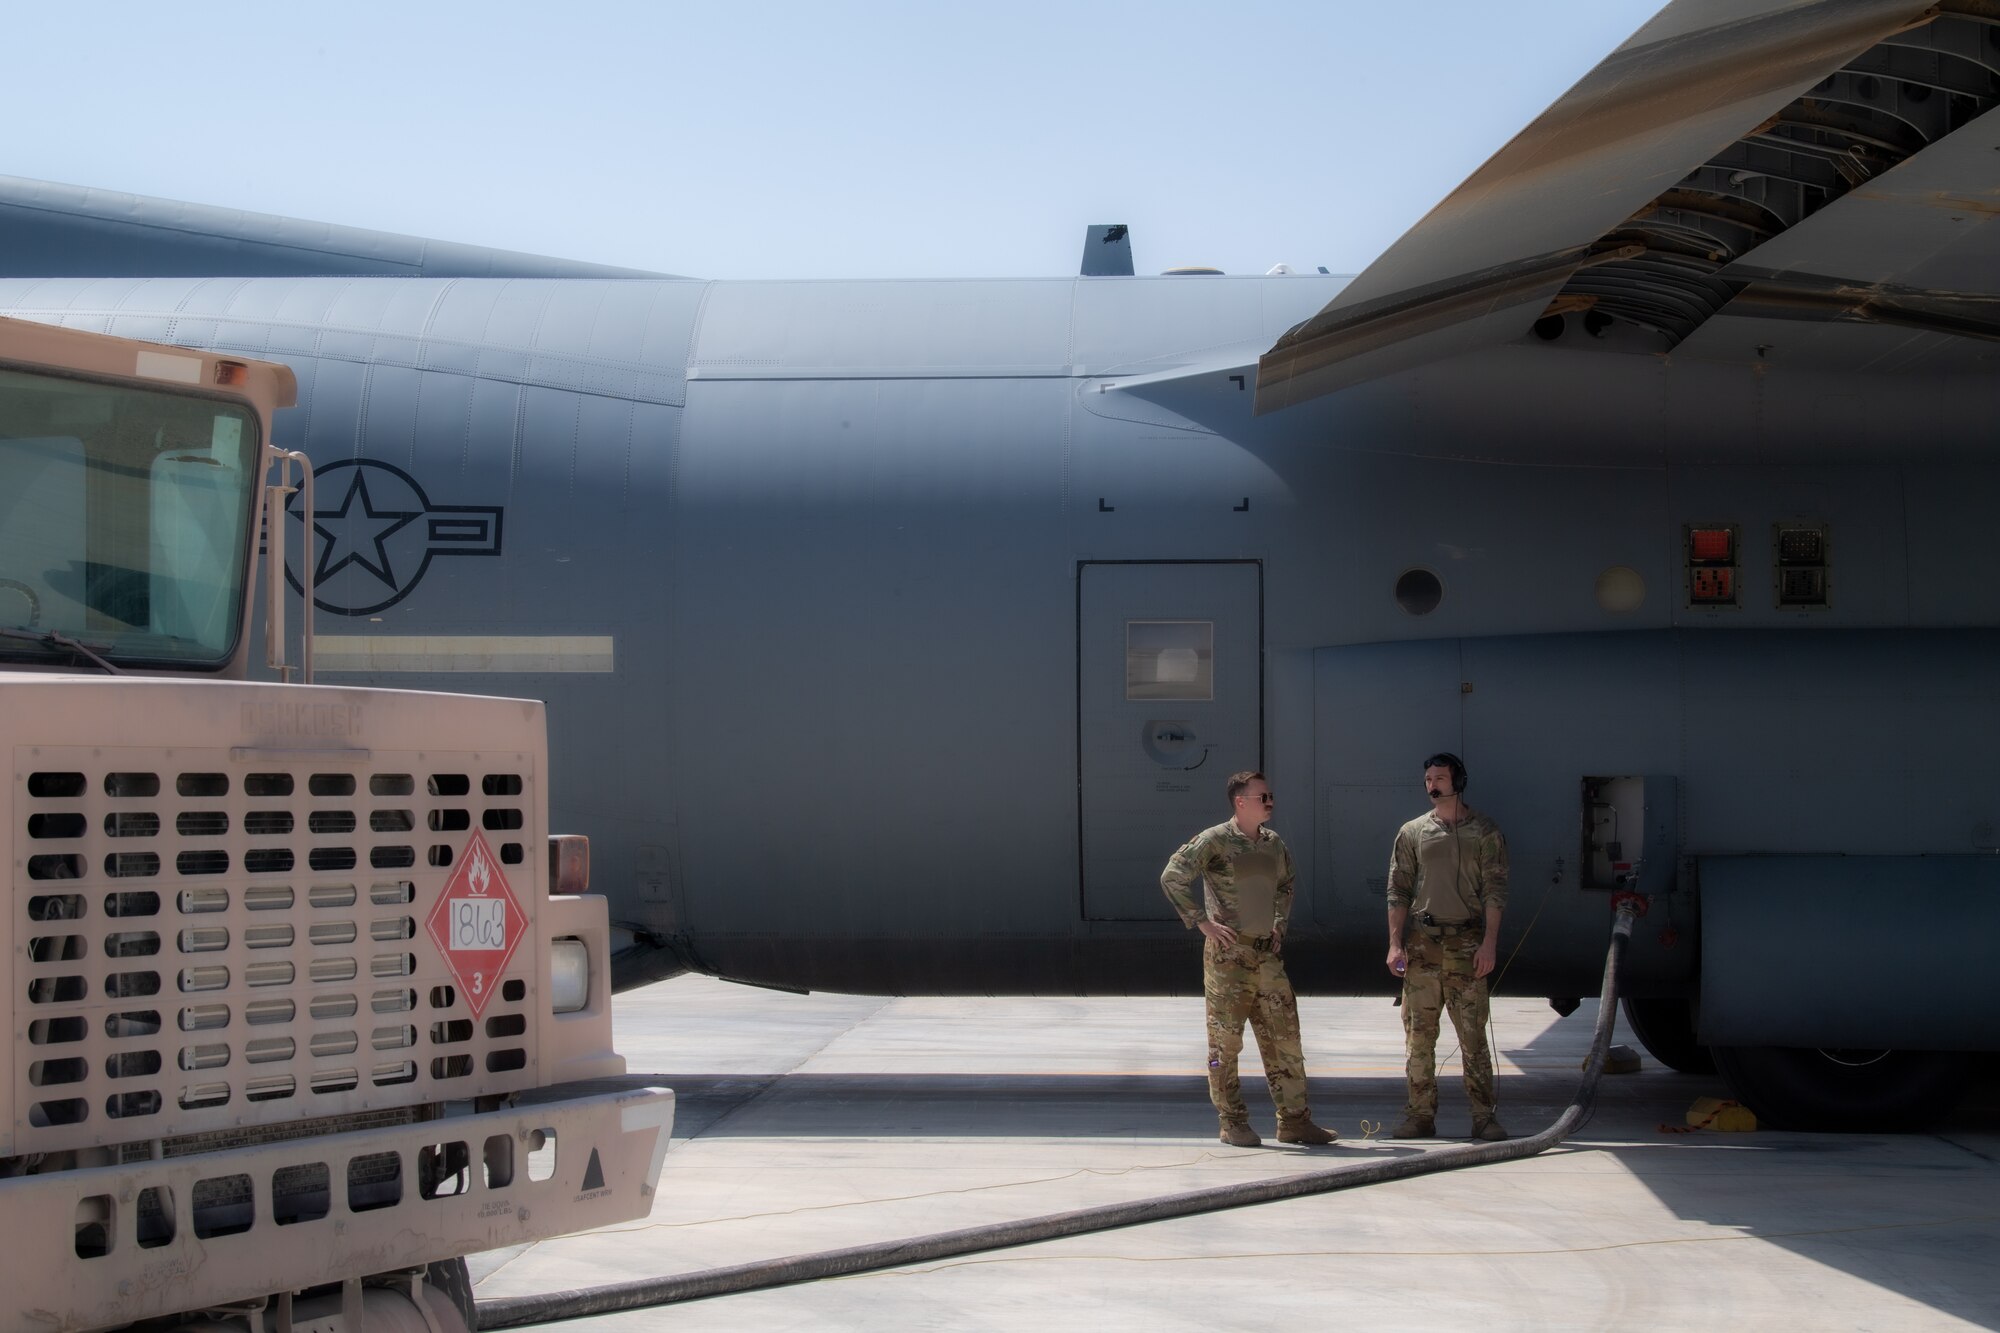 332d Air Expeditionary Logistics Readiness Squadron loads cargo onto a C-130 Hercules for an Agile Combat Employment (ACE) exercise. ACE exercises enable the Air Force’s ability to develop, maintain, and share timely, accurate and relevant mission information across dispersed forces despite adversary attempts to counter act.